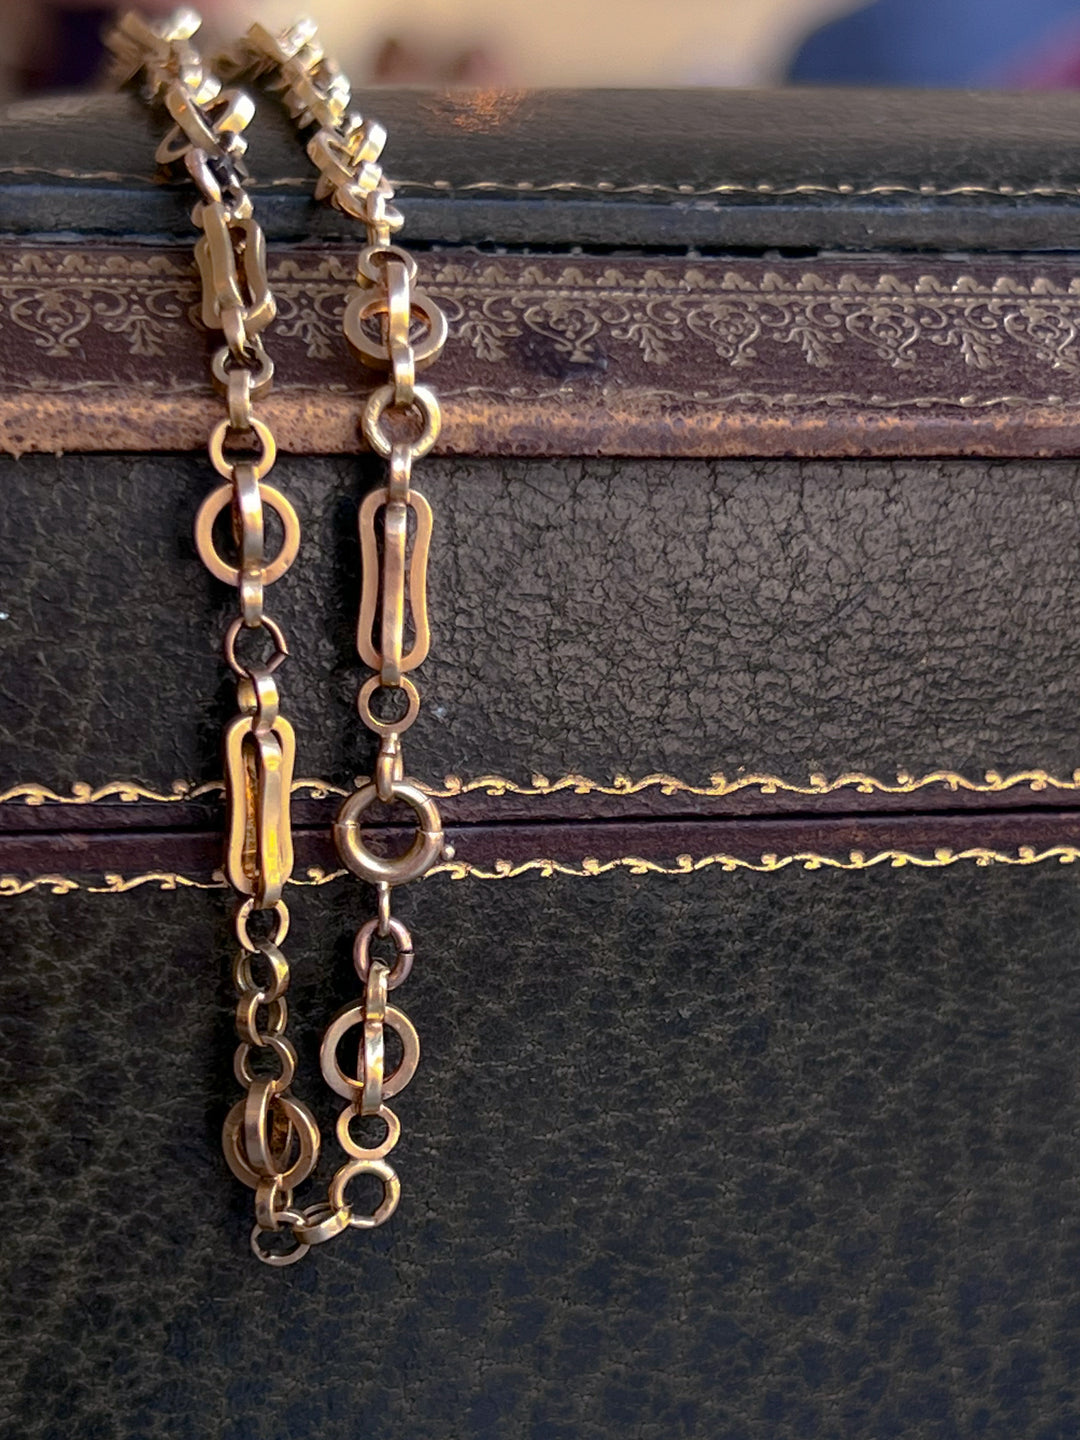 18ct French Chain With Interlocked Orbs Circa 1860